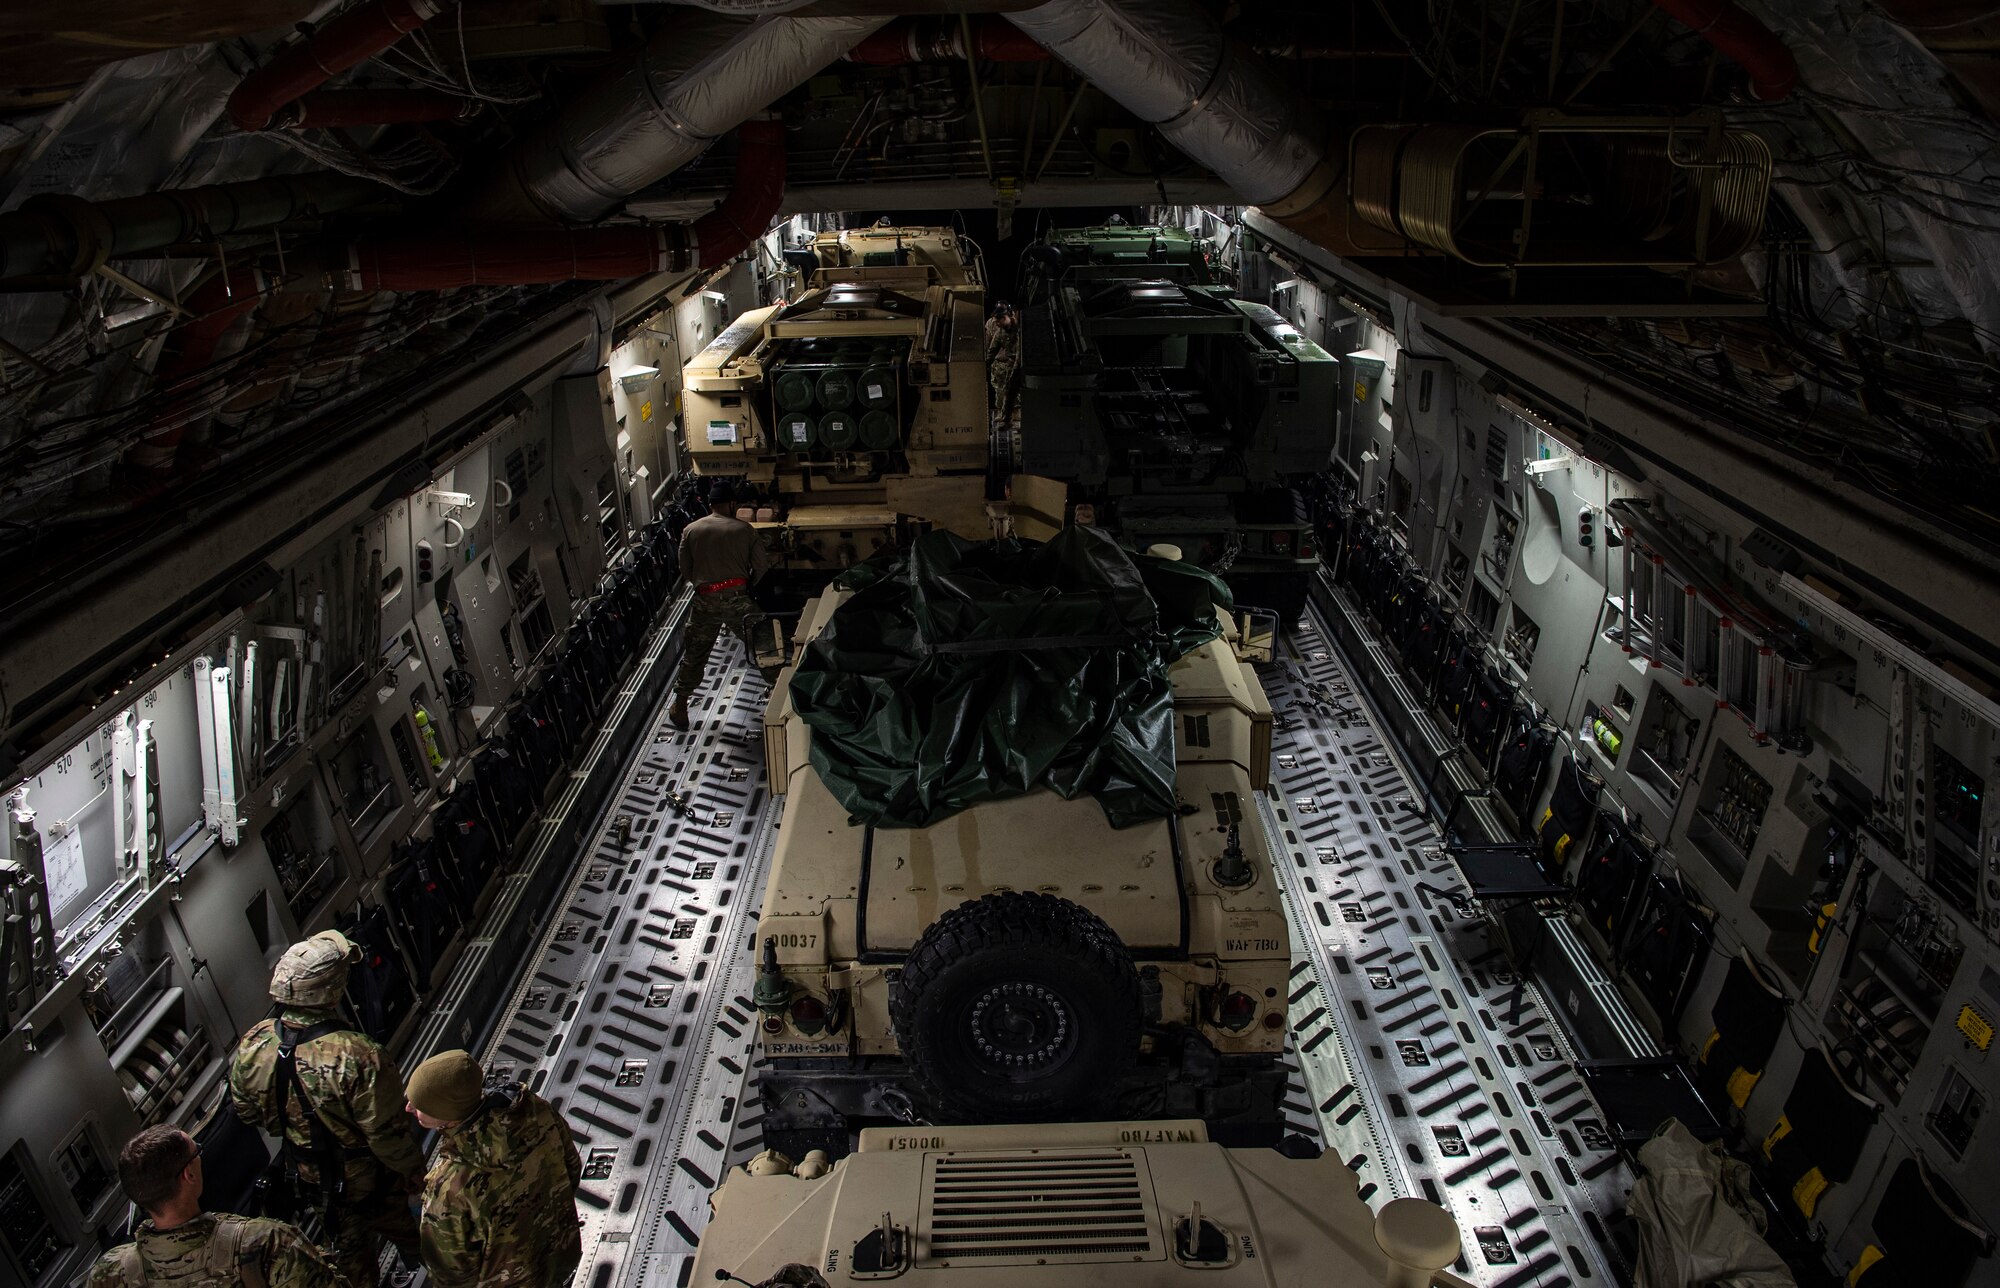 Two U.S. Army M142 High Mobility Artillery Rocket System (HIMARS) and two U.S. Army HUMVEEs sit inside a C-17 Globemaster III for a HIMARS Rapid Infiltration (HIRAIN) joint operation during Exercise Rainier War 21B at Joint Base Lewis-McChord, Washington, Nov. 6, 2021. Rainier War is a semi-annual, large readiness exercise led by 62nd Airlift Wing, designed to train aircrews under realistic scenarios that support a full spectrum readiness operations against modern threats and replicate today’s contingency operations. (U.S. Air Force photo by Staff Sgt. Tryphena Mayhugh)